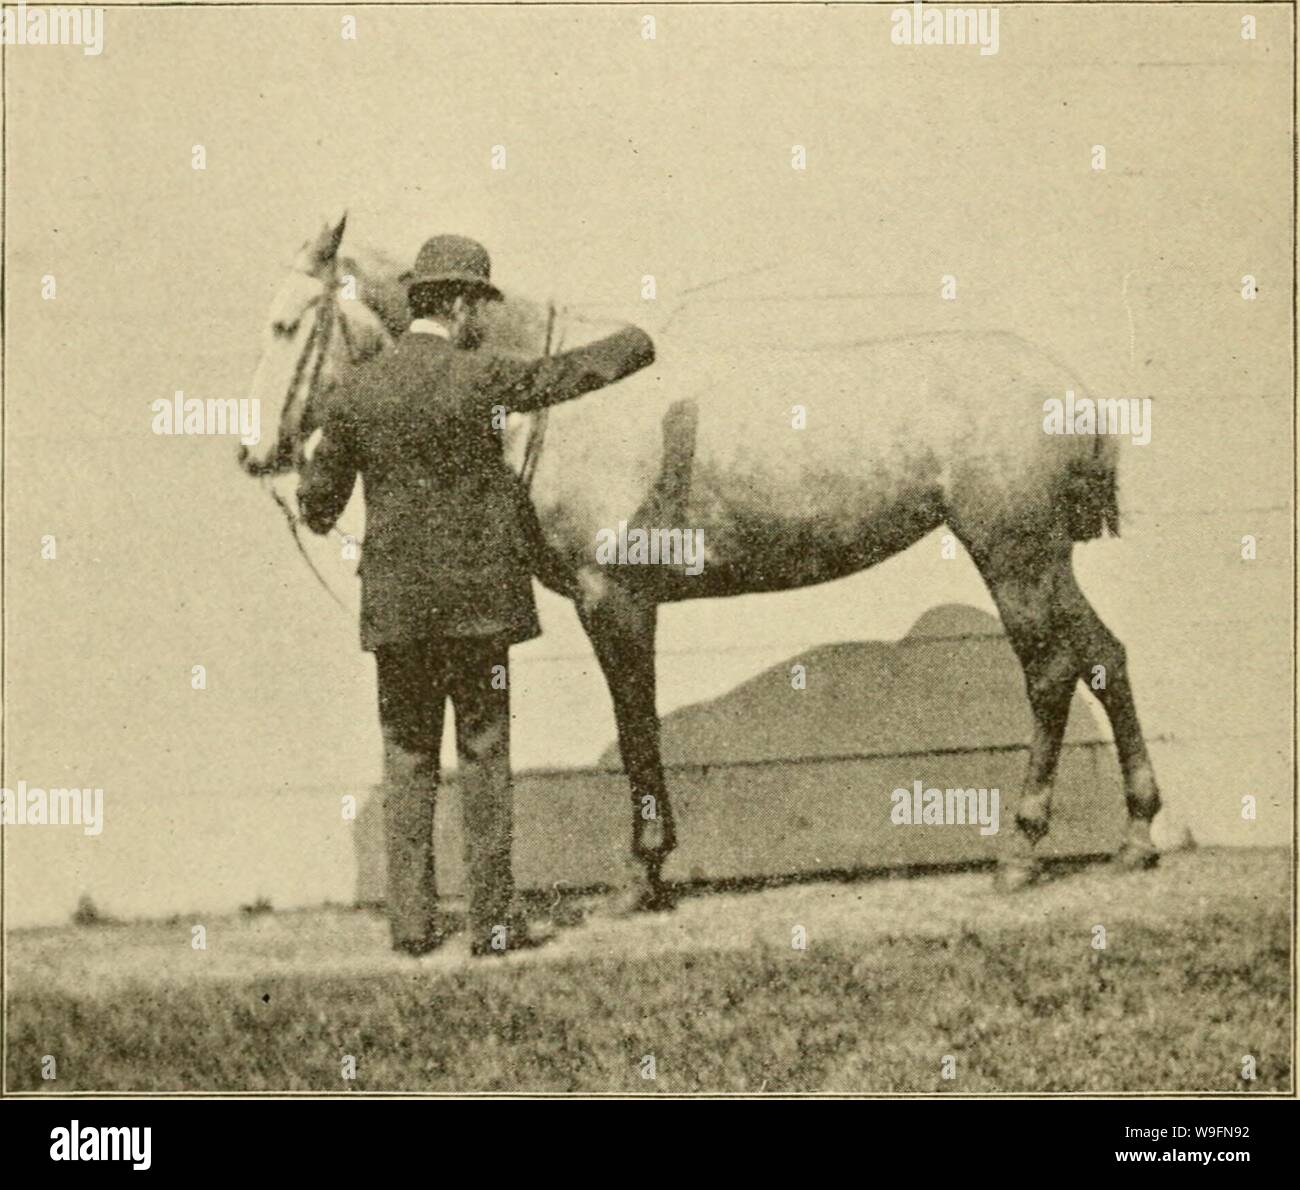 Archive image from page 57 of Curb, snaffle, and spur . Curb, snaffle, and spur : a method of training young horses for the cavalry service, and for general use under the saddle  curbsnafflespu00ande Year: 1894 ( 52 Cii7'b, Snaffle, and Spttr. taps upon the rump, holding the forehand in place. To bring the horse into a natural position, the hind legs should not be permitted to move to the rear, but the trainer should induce the horse    CARRYING THK irilM LM'i-.k iHL iiuui. to advance the fore legs until the horse rests easily. Should the mounted horse be slow in learning this, a few lessons g Stock Photo